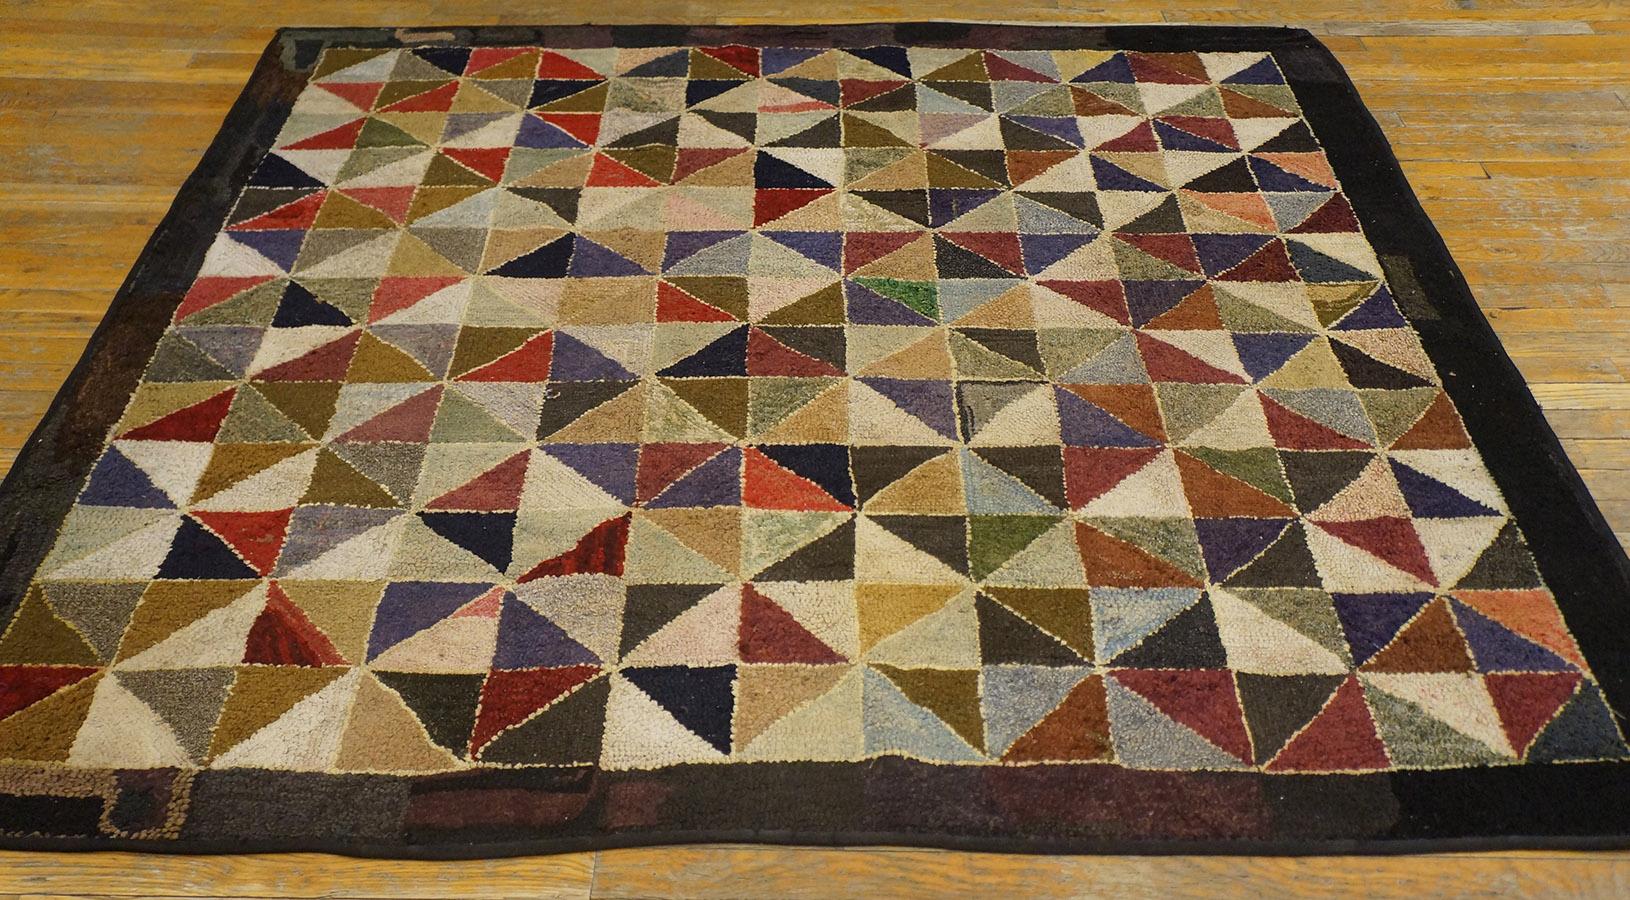 Early 20th Century American Hooked Rug ( 6' x 6' - 183 x 183 cm ) In Good Condition For Sale In New York, NY